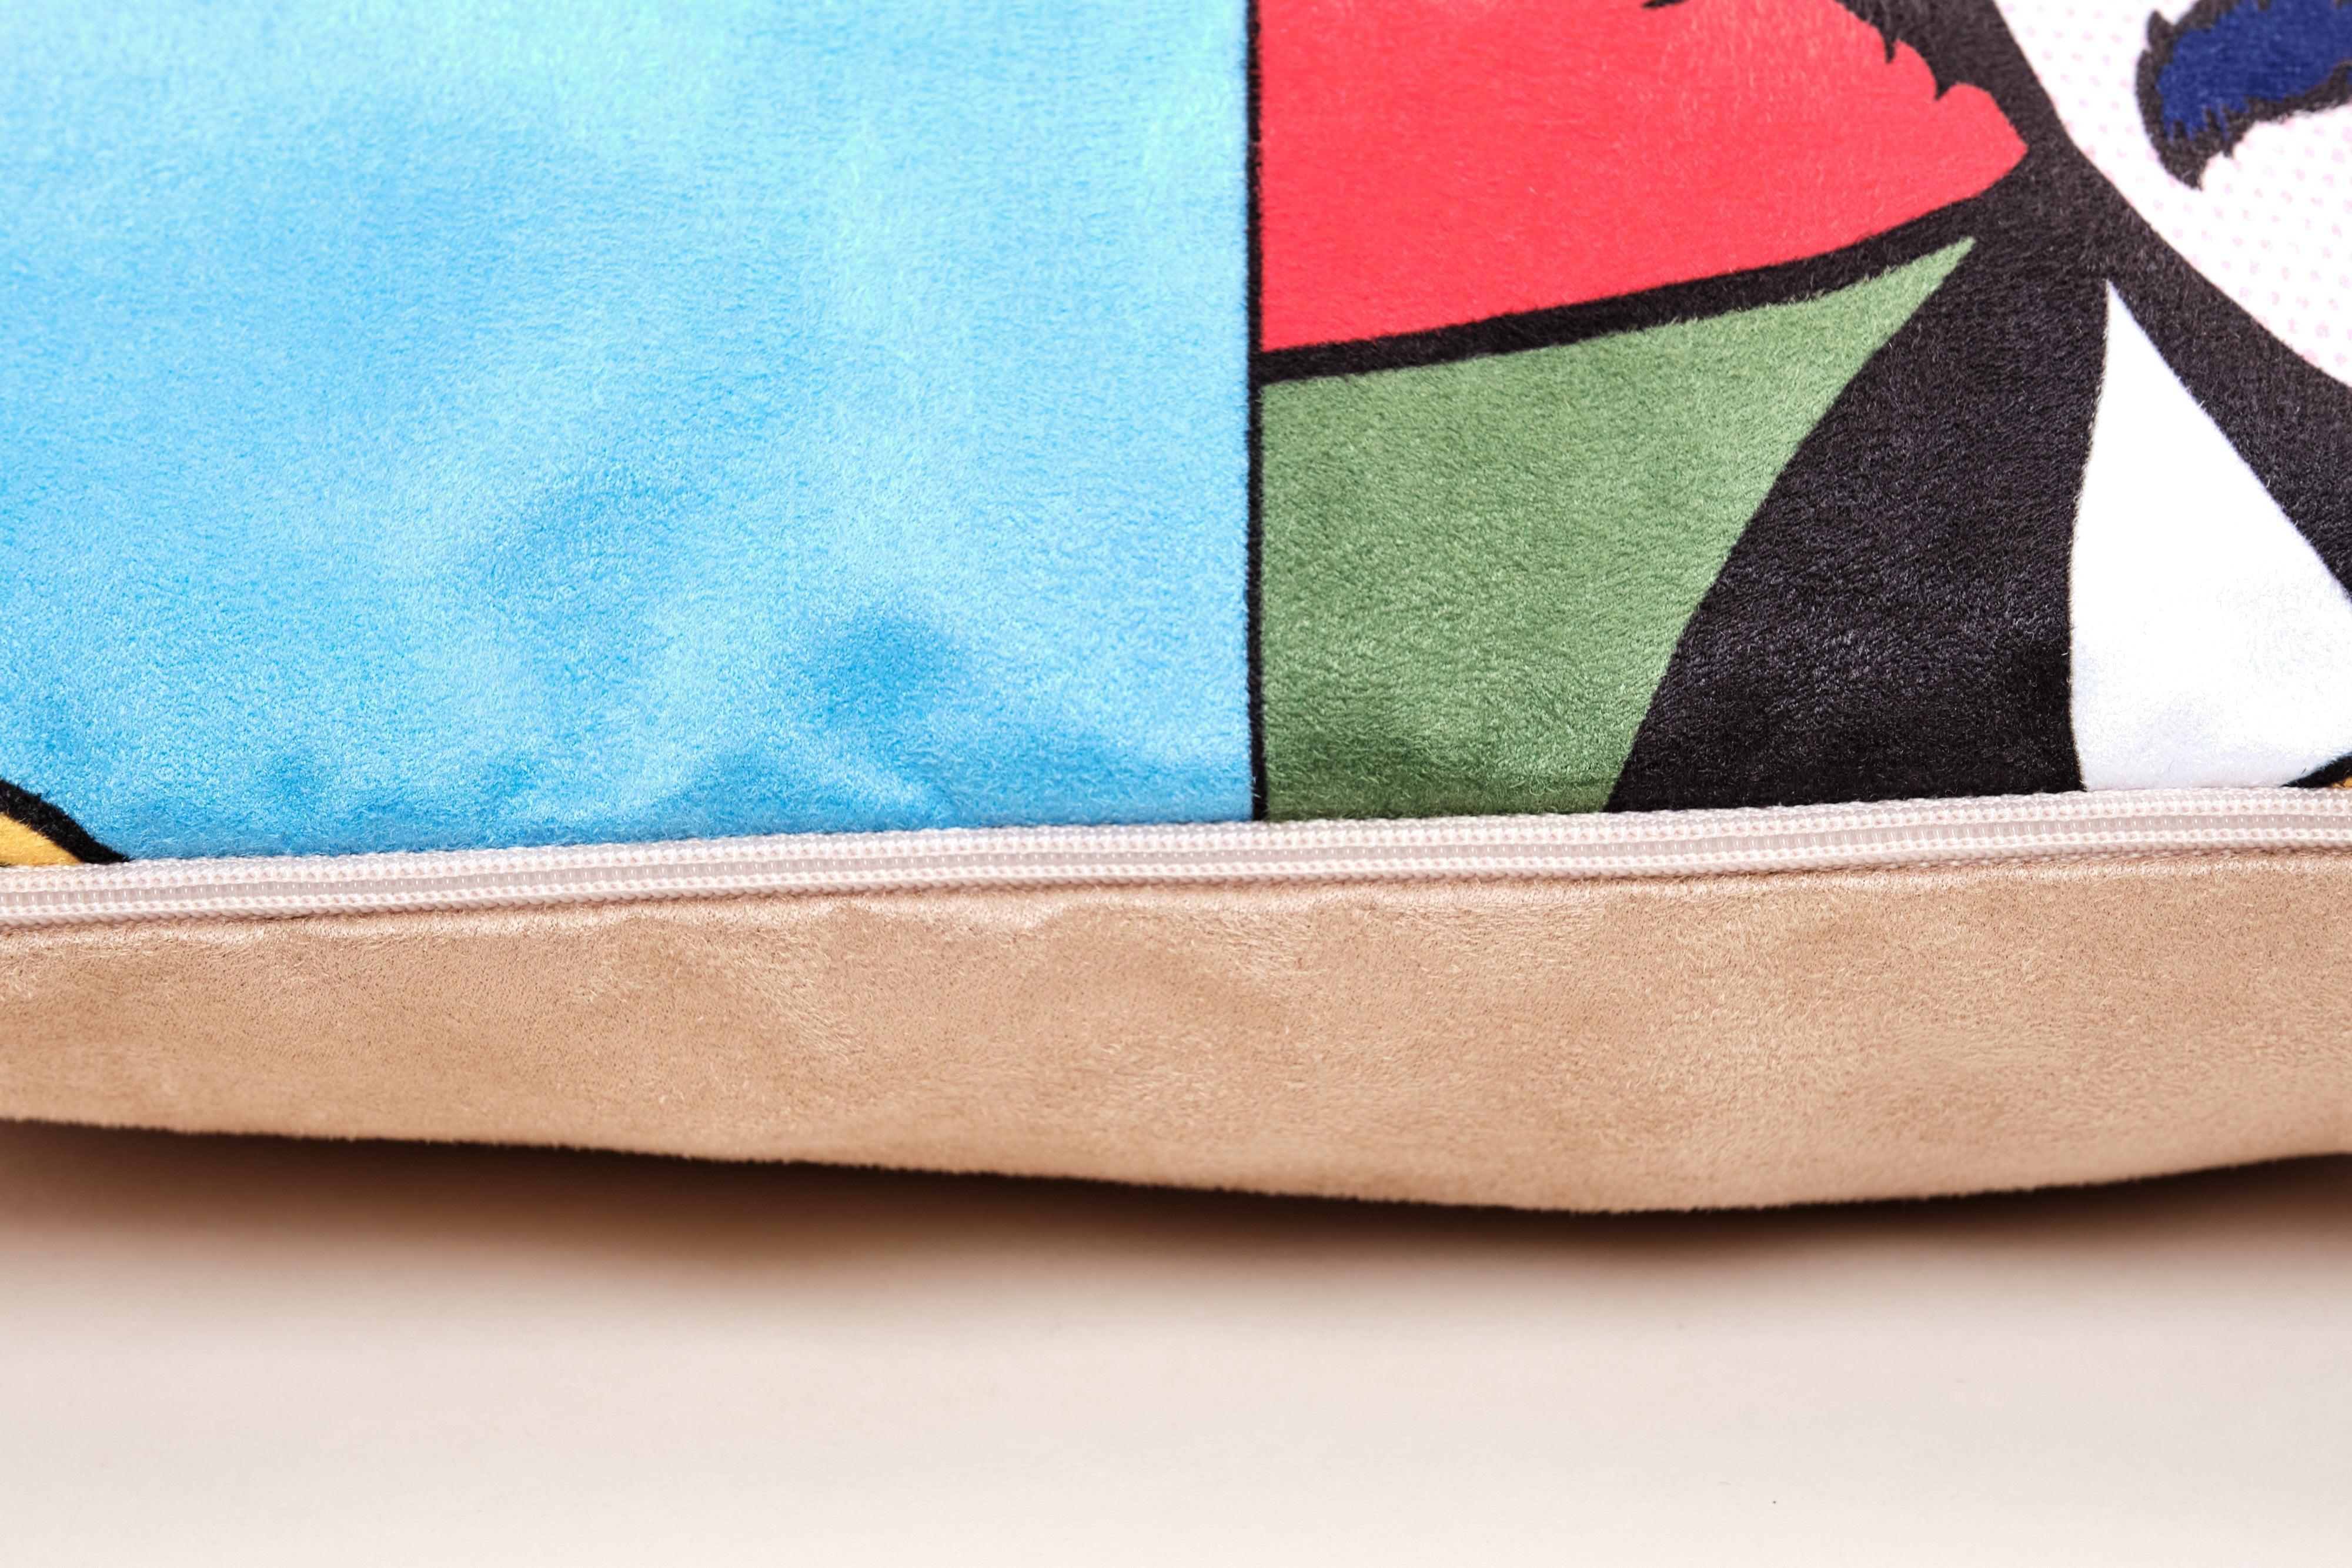 Variations Of Points Of Contact No 9 -TATE- Victor Pasmore Cushion - Handmade Cushions UK - WeLoveCushions